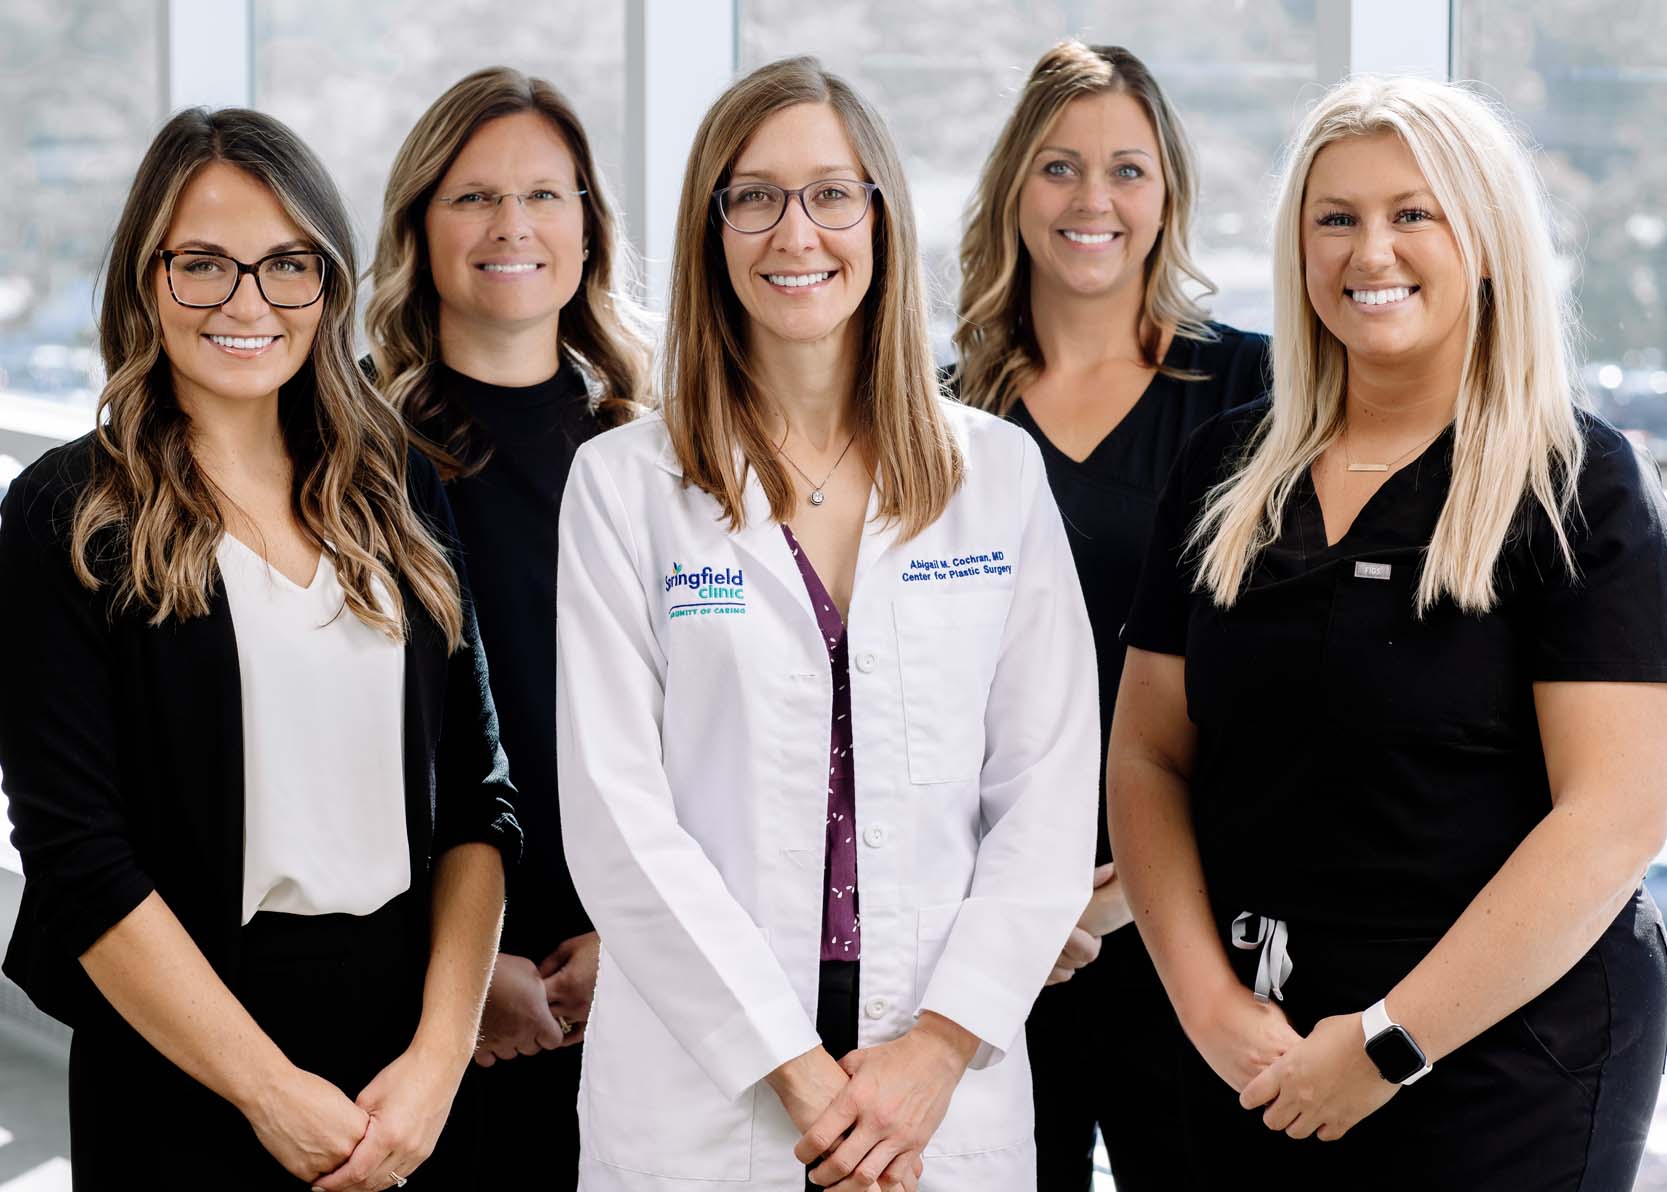 Female plastic surgery doctor standing with a group of female nurses.